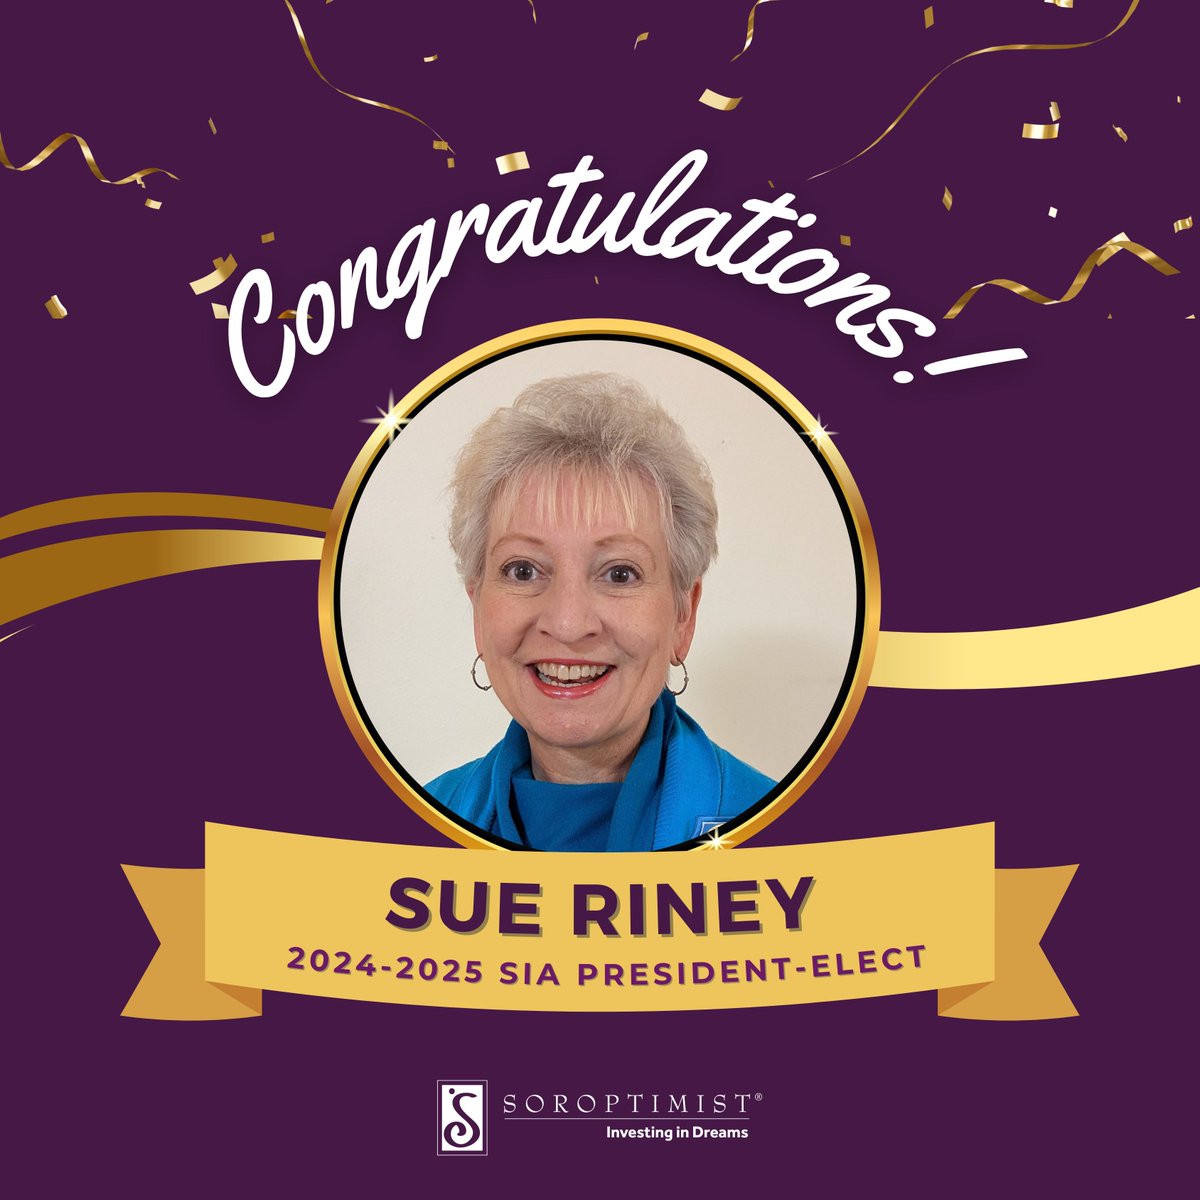 Congratulations to Sue Riney, SI/Oak Harbor, WA (Northwestern Region), who has been elected to serve as the 2024-2025 SIA President-elect! View the election results: soroptimist.imgix.net/05-for-members…